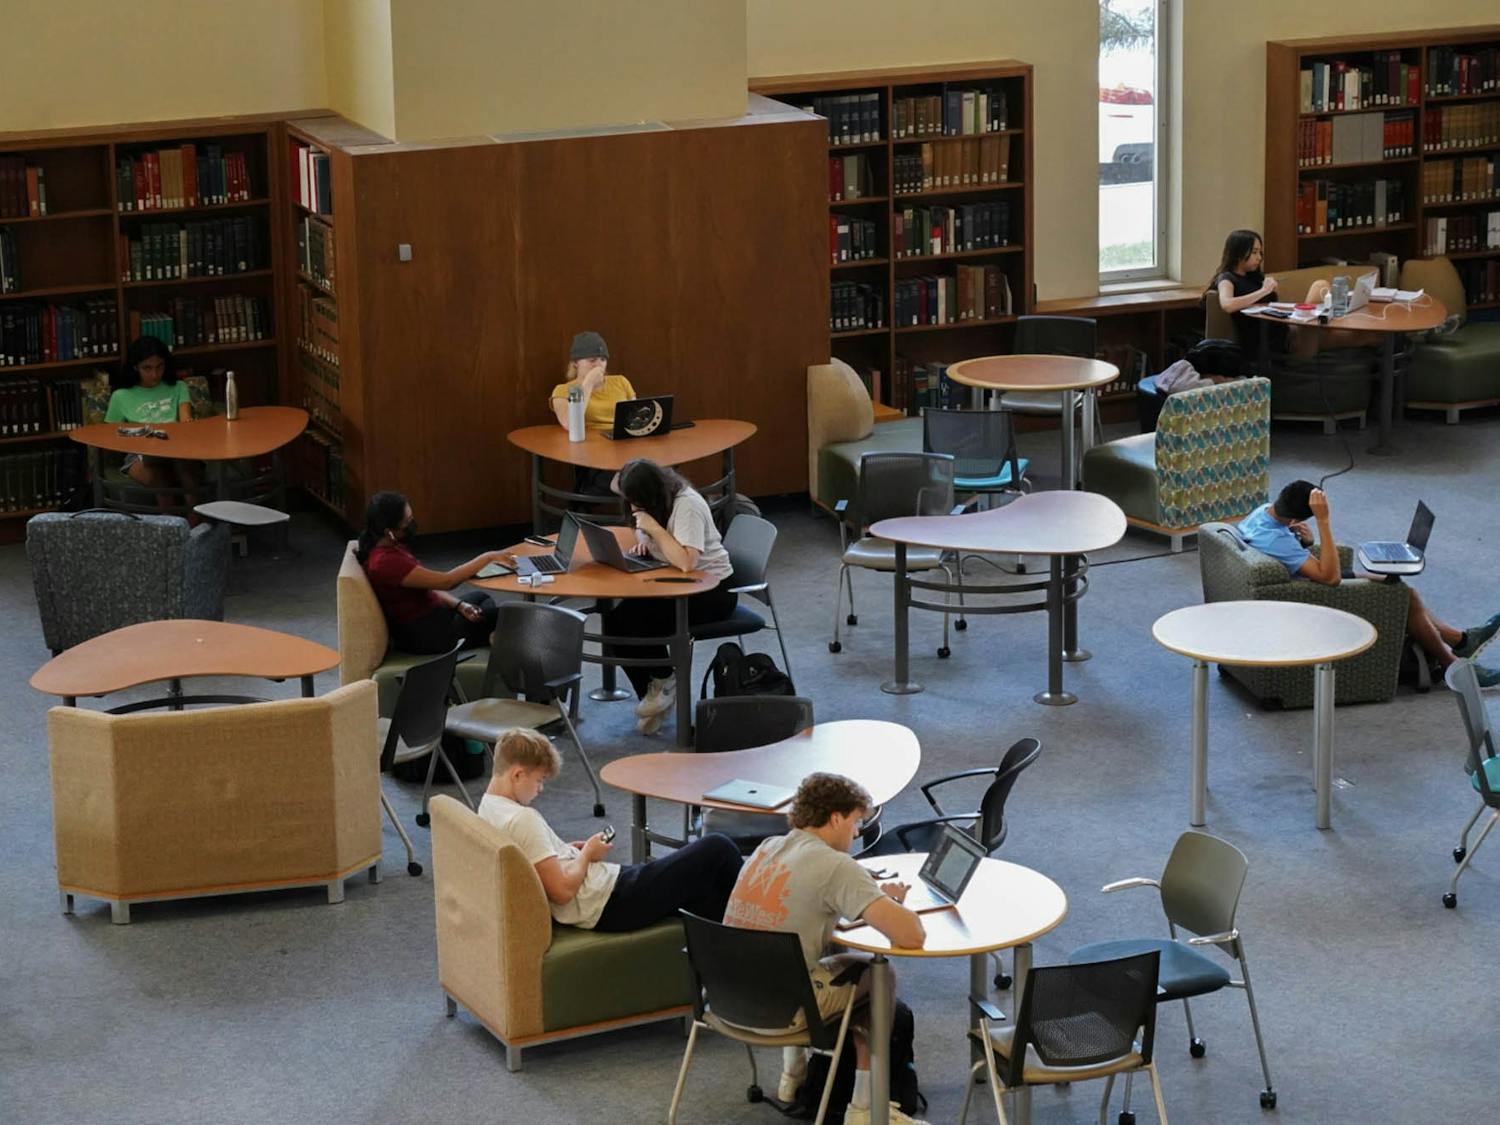 Students are studying in the library for their future tests.